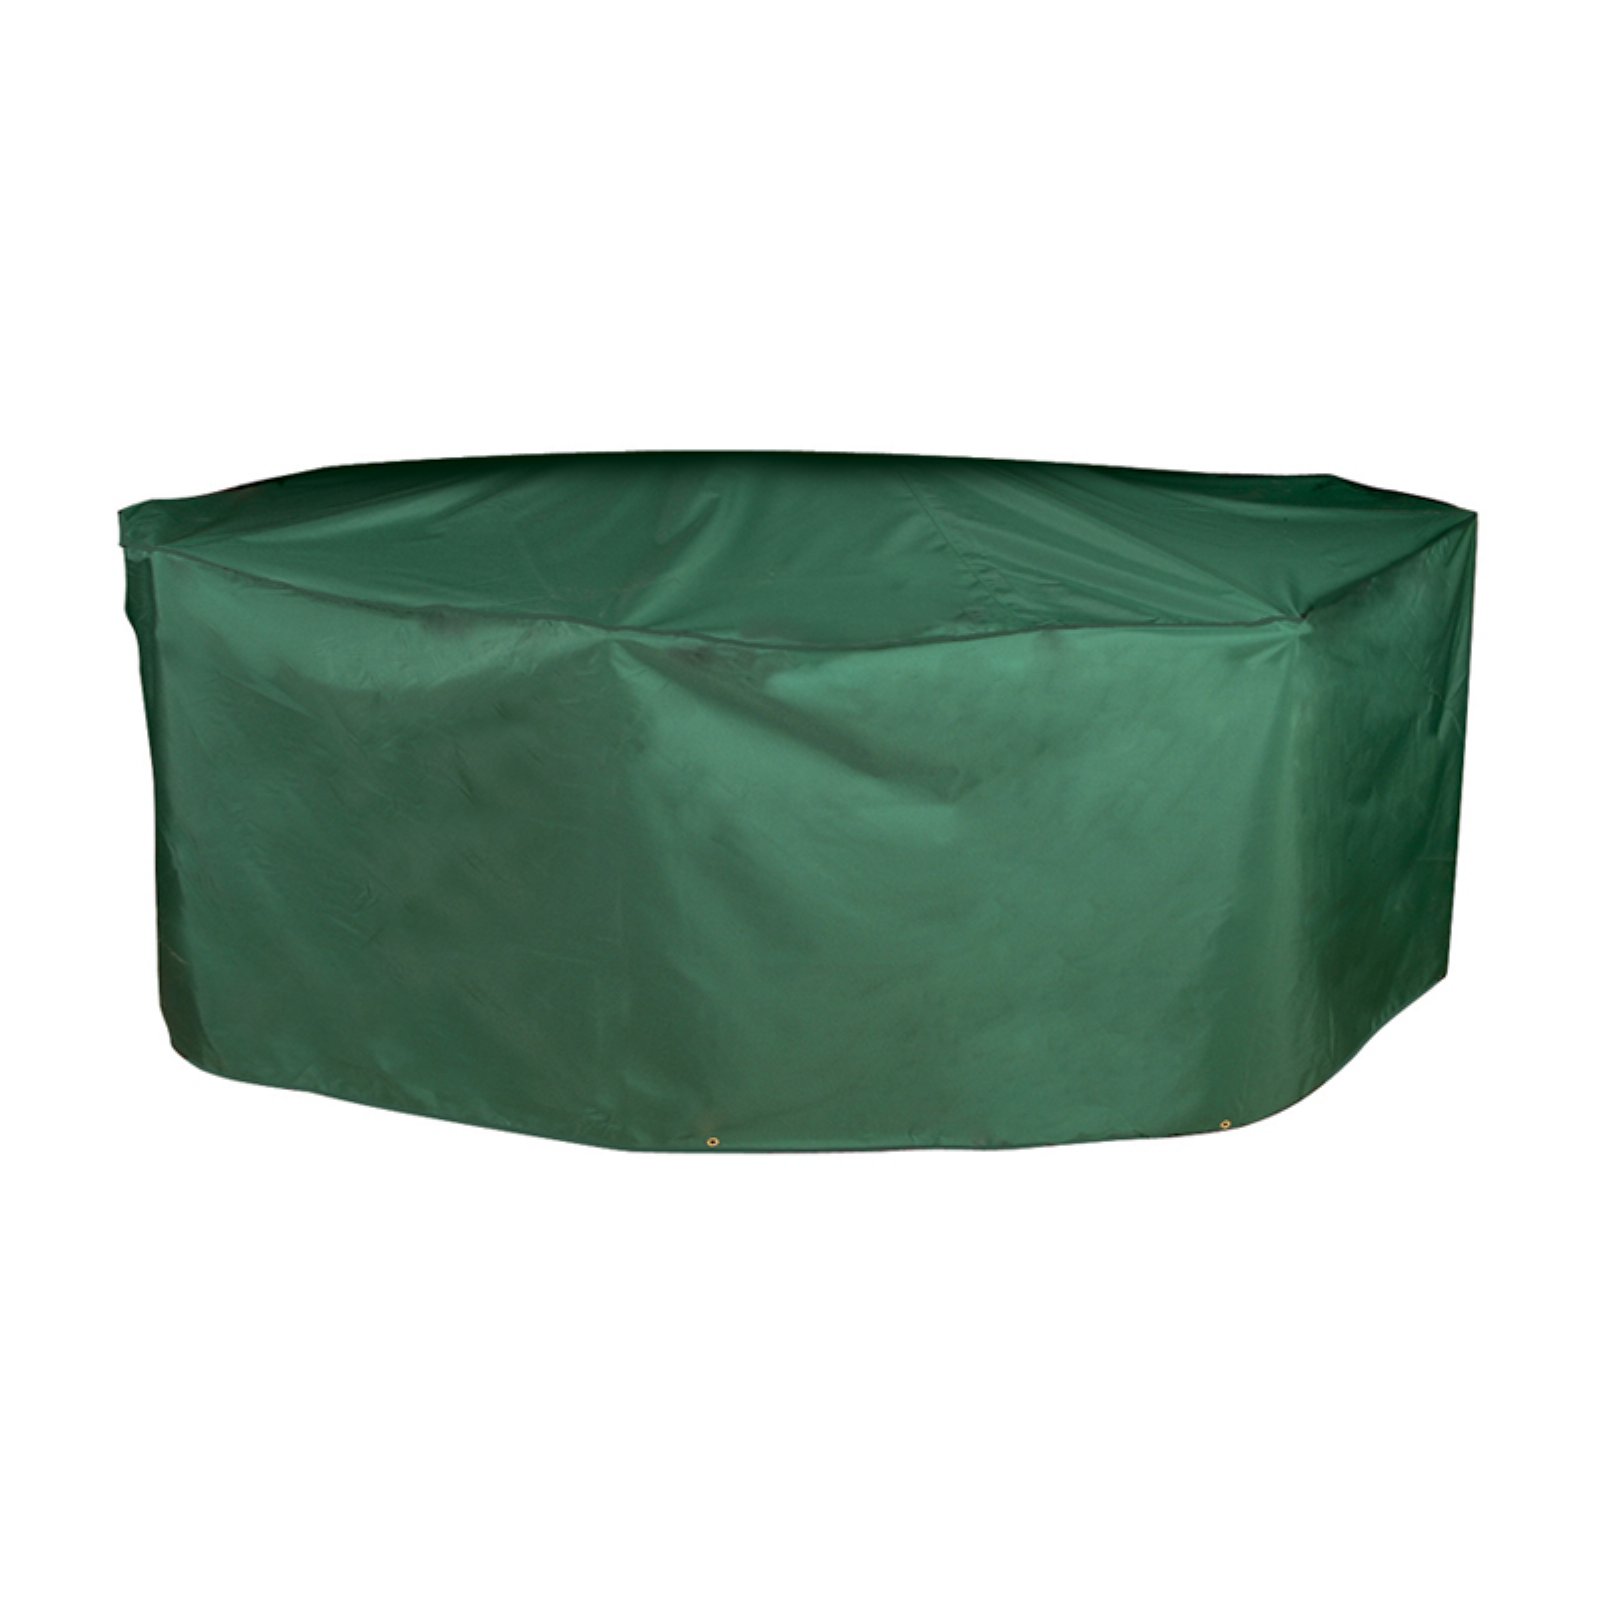 Bosmere C537 Oval / Rectangular Table and Chairs Cover - 126 x 75 in. - Green - image 1 of 4